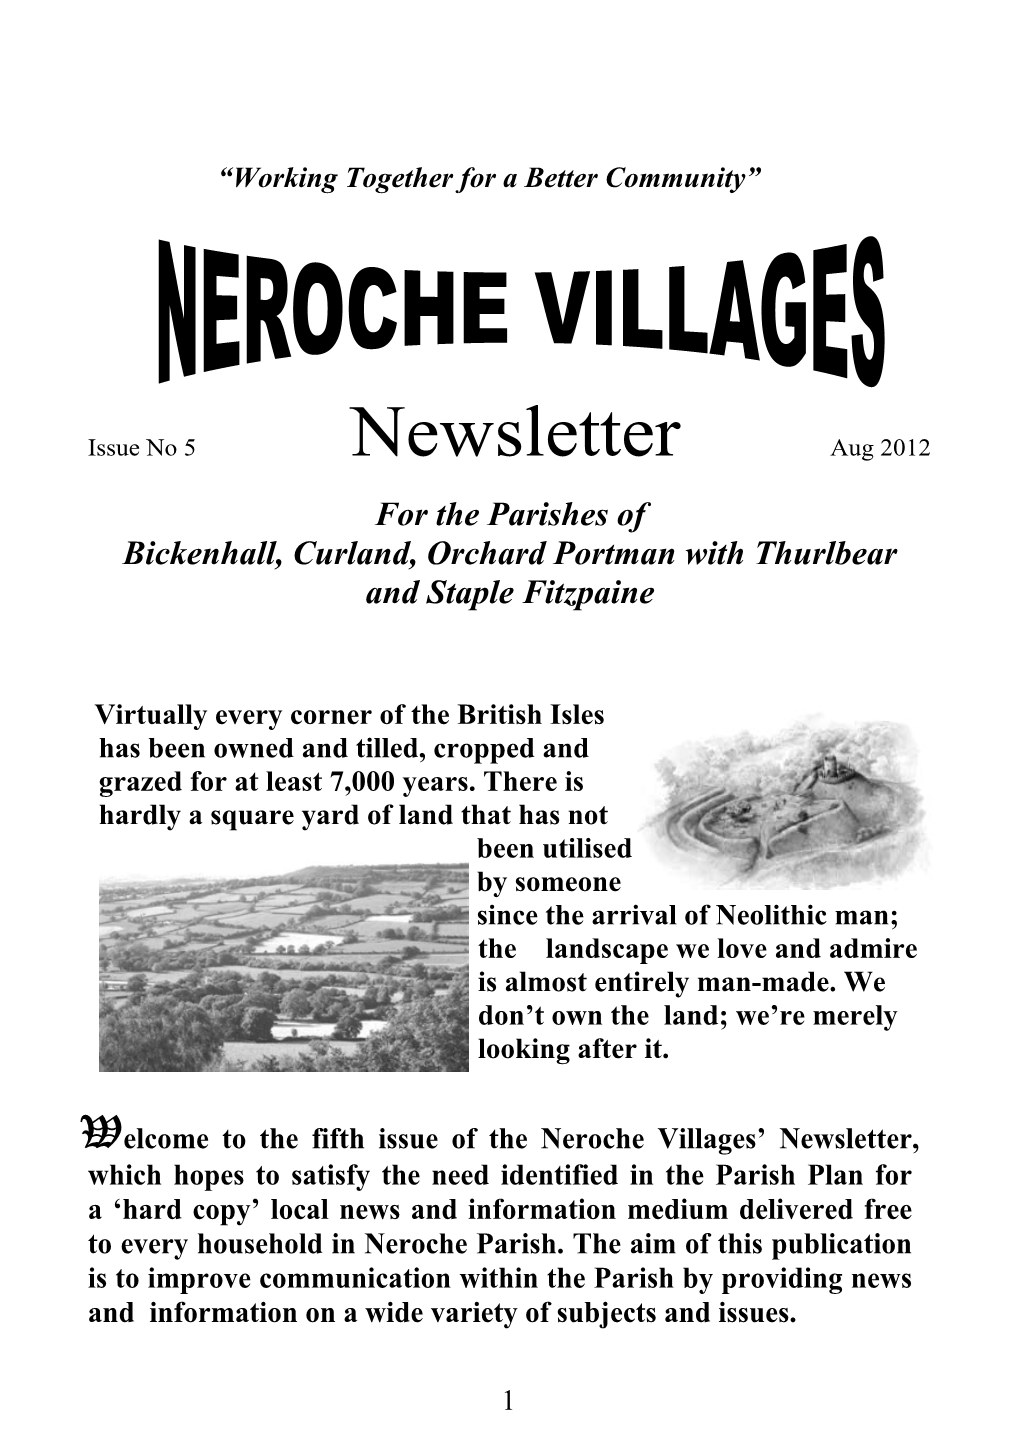 Newsletter Aug 2012 for the Parishes of Bickenhall, Curland, Orchard Portman with Thurlbear and Staple Fitzpaine